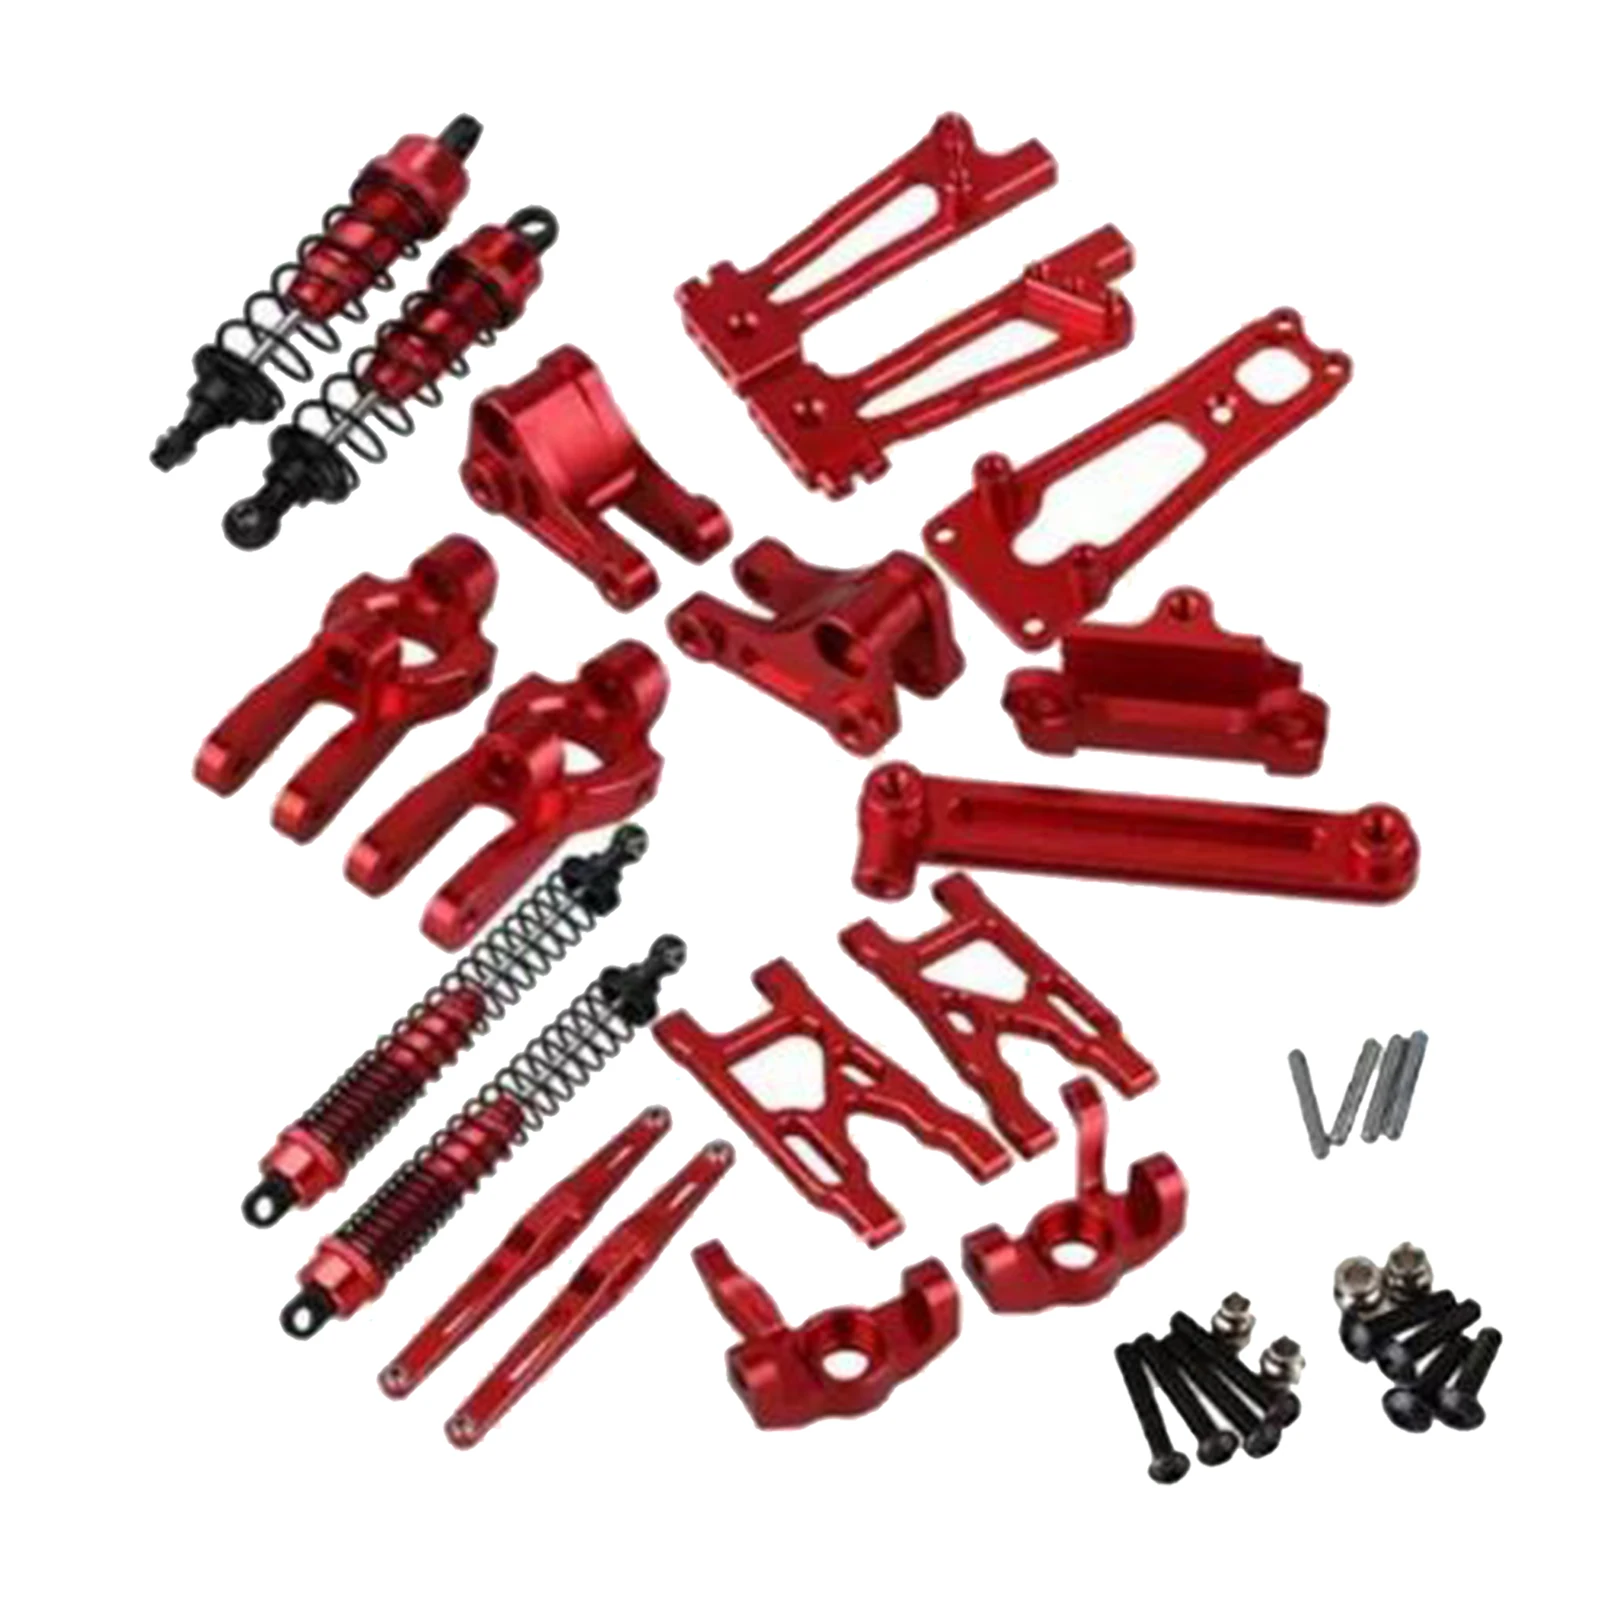 1/10 RC Car Spare Parts,Complete Set,Metal Upgrade Parts for WLtoys K949 10428-A 10428-B 10428-C